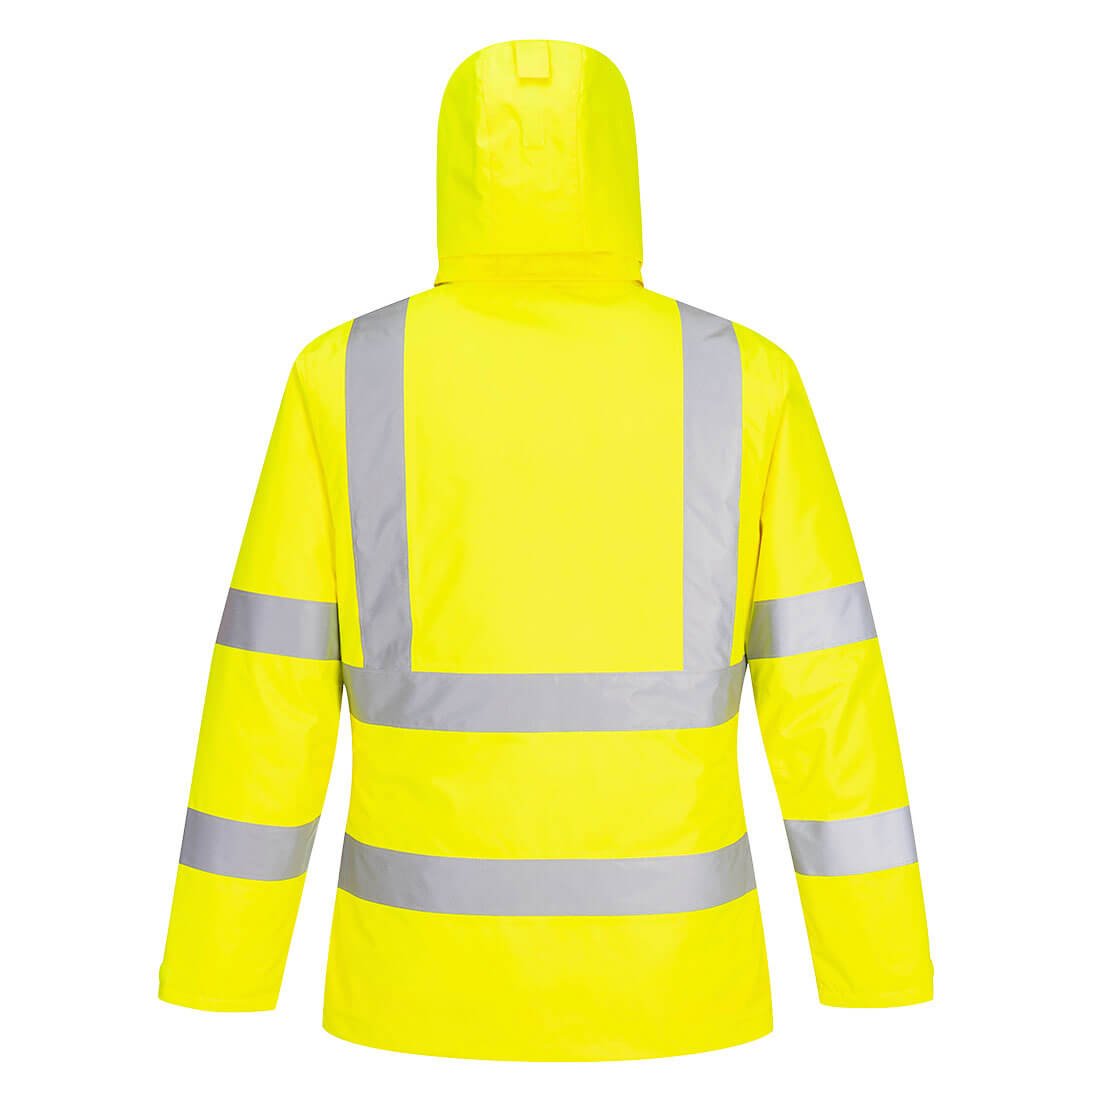 Portwest® Planet EC60 ECO Hi-Vis Winter Jackets are made with environmentally friendly recycled polyester and features reflective tape,  detachable lined hood, mic tabs, drawcord, internal pocket and water resistant fabric finish.